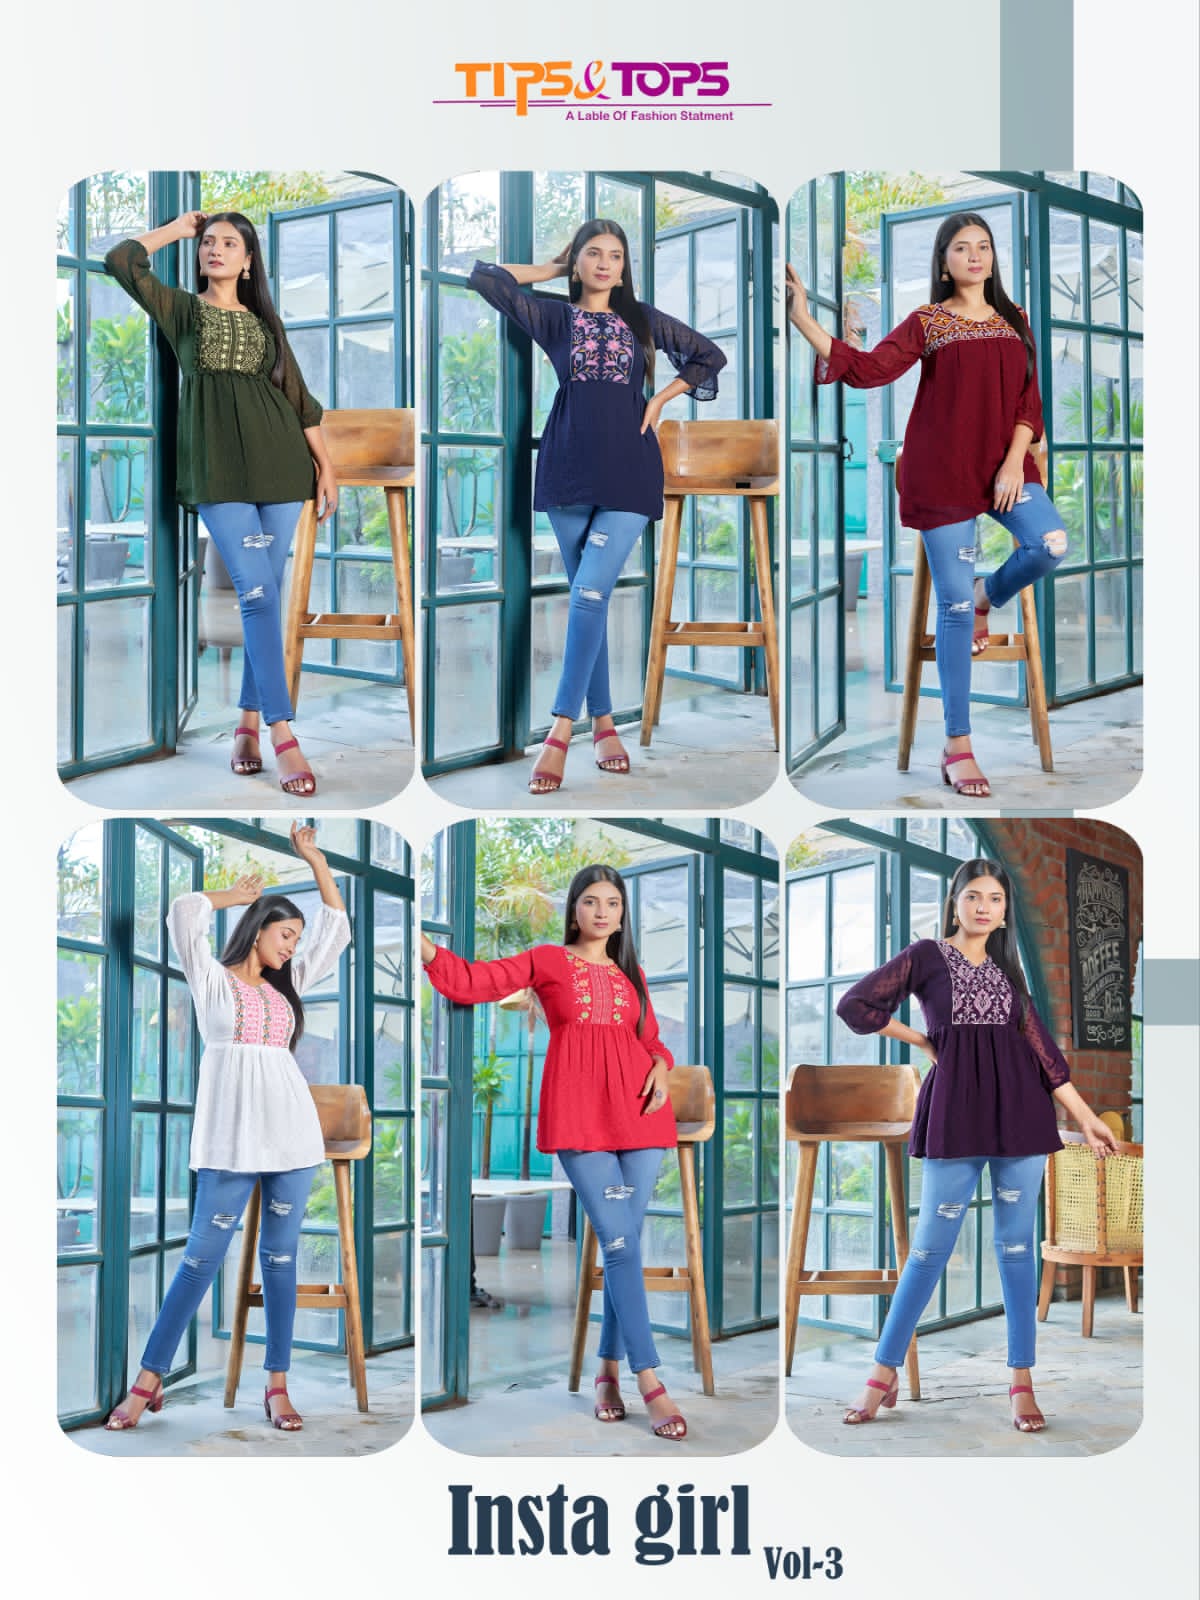 Tips And Tops Insta Girl Vol 3 collection 7